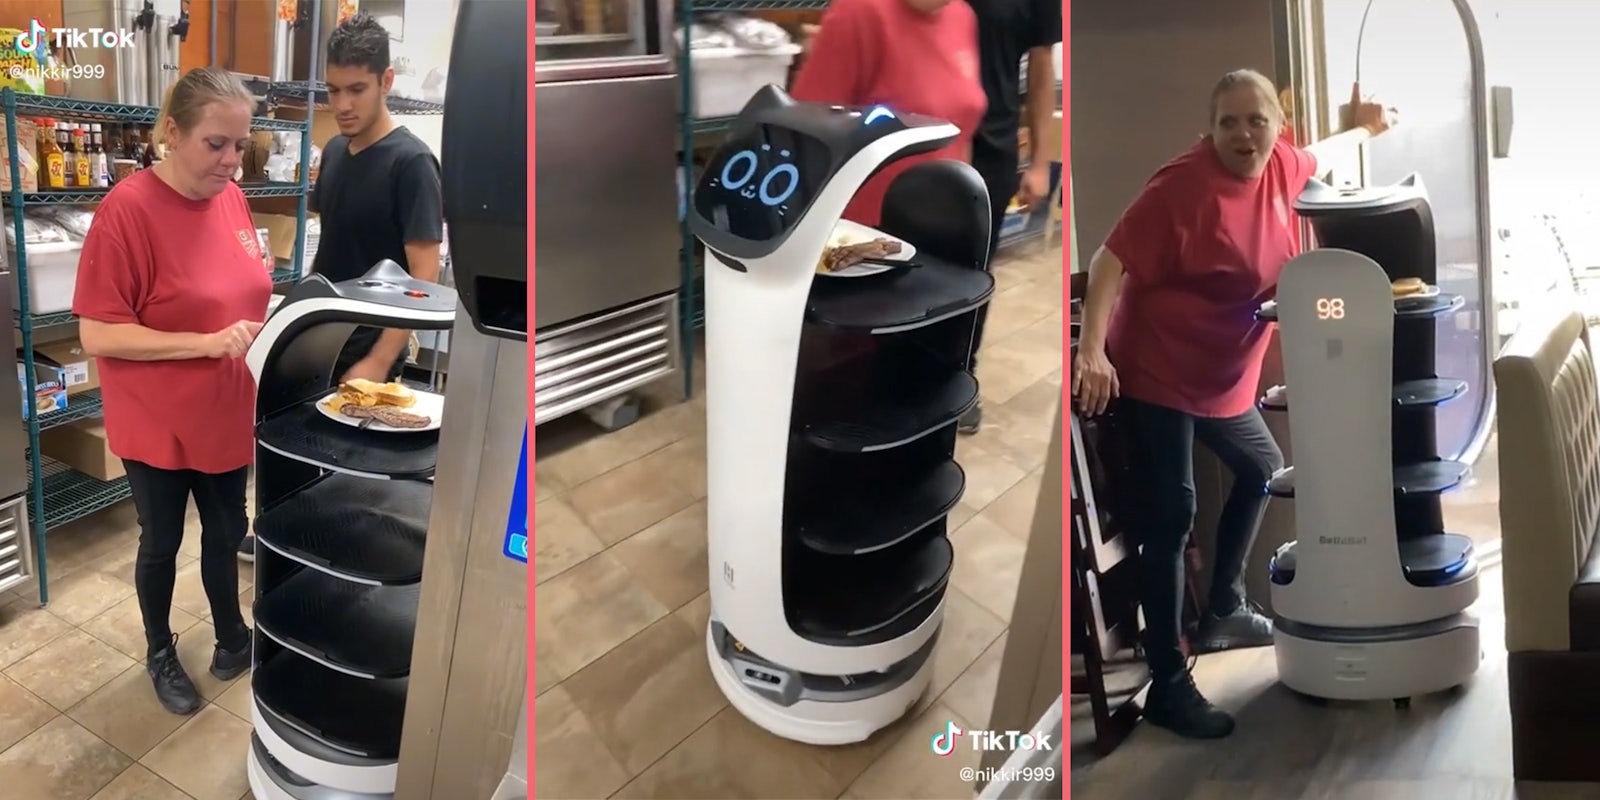 restaurant employees placing food on robot (l) server robot with cat face carrying plate (c) restaurant employee opening door for server robot (r)